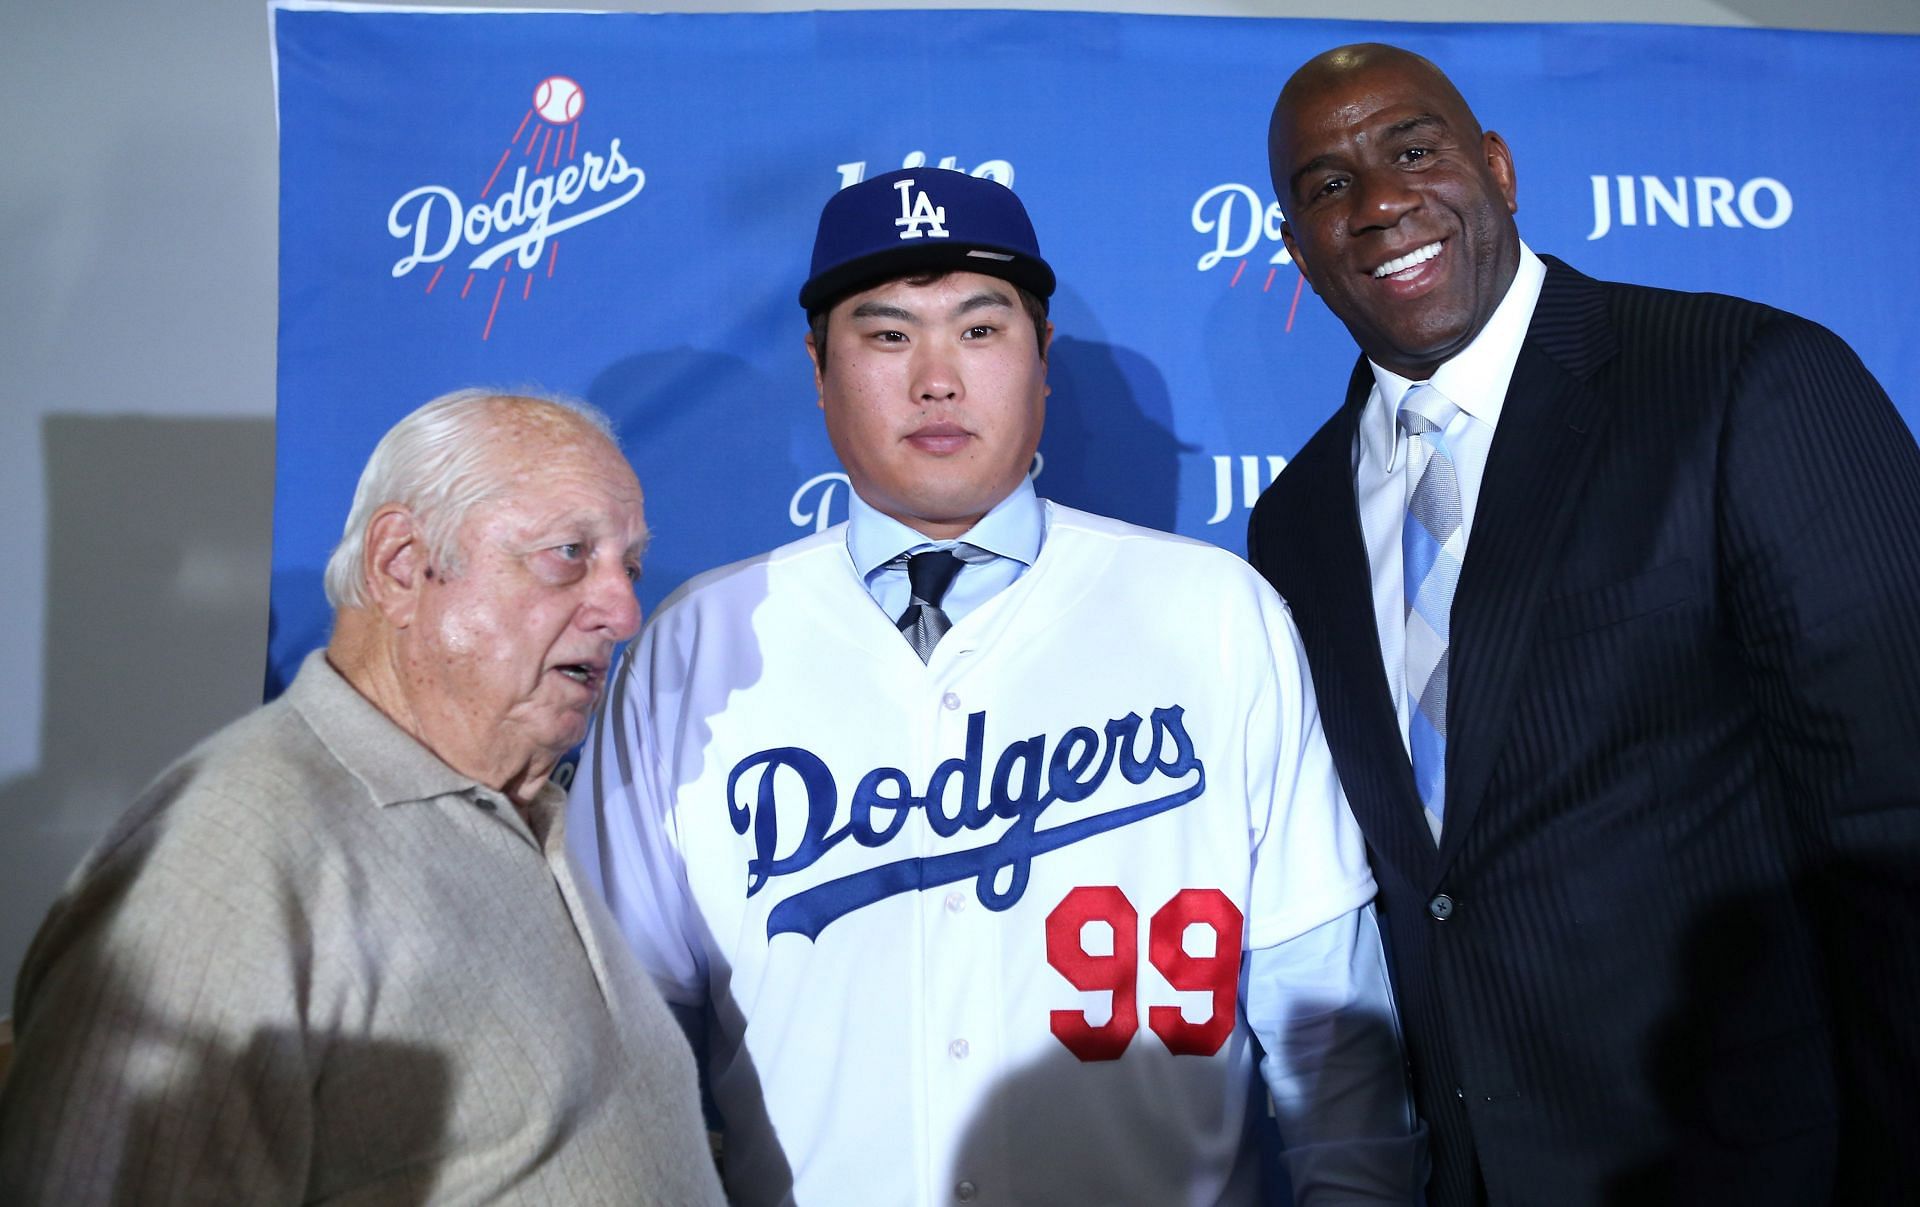 Does Magic Johnson own the Dodgers?